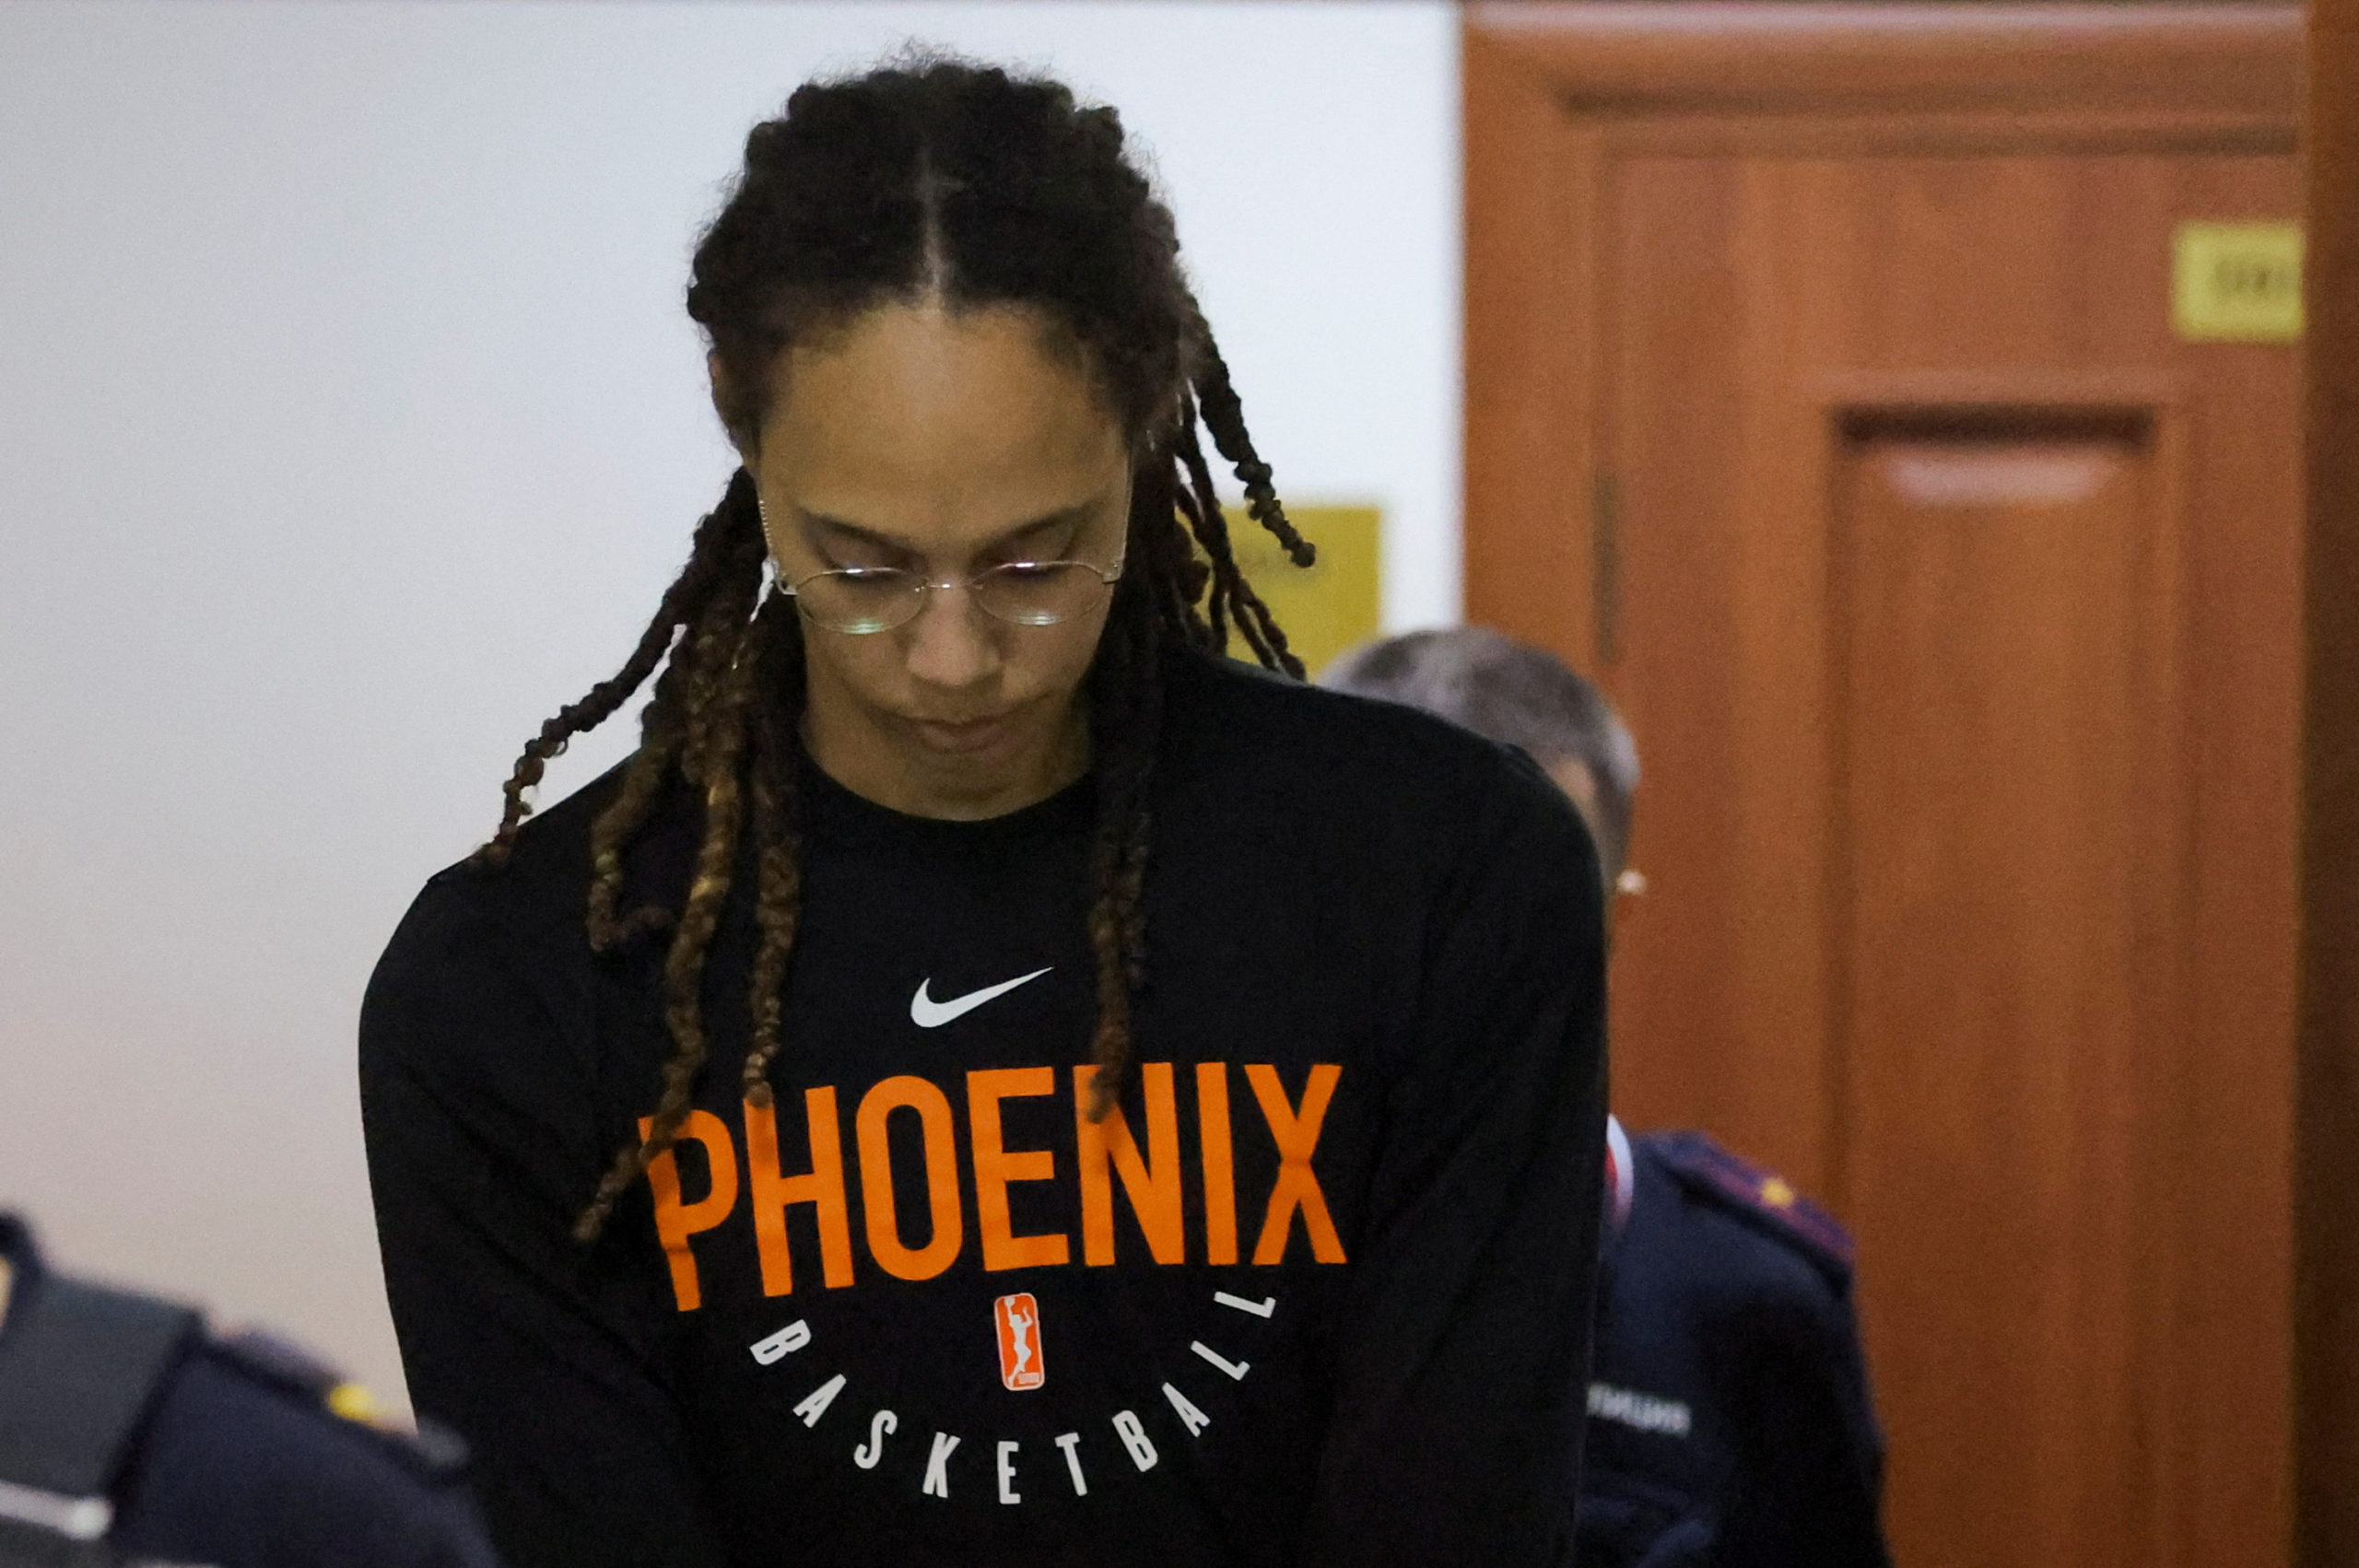 FILE PHOTO: U.S. basketball player Brittney Griner, who was detained at Moscow's Sheremetyevo airport and later charged with illegal possession of cannabis, is escorted before a court hearing in Khimki outside Moscow, Russia July 27, 2022. 